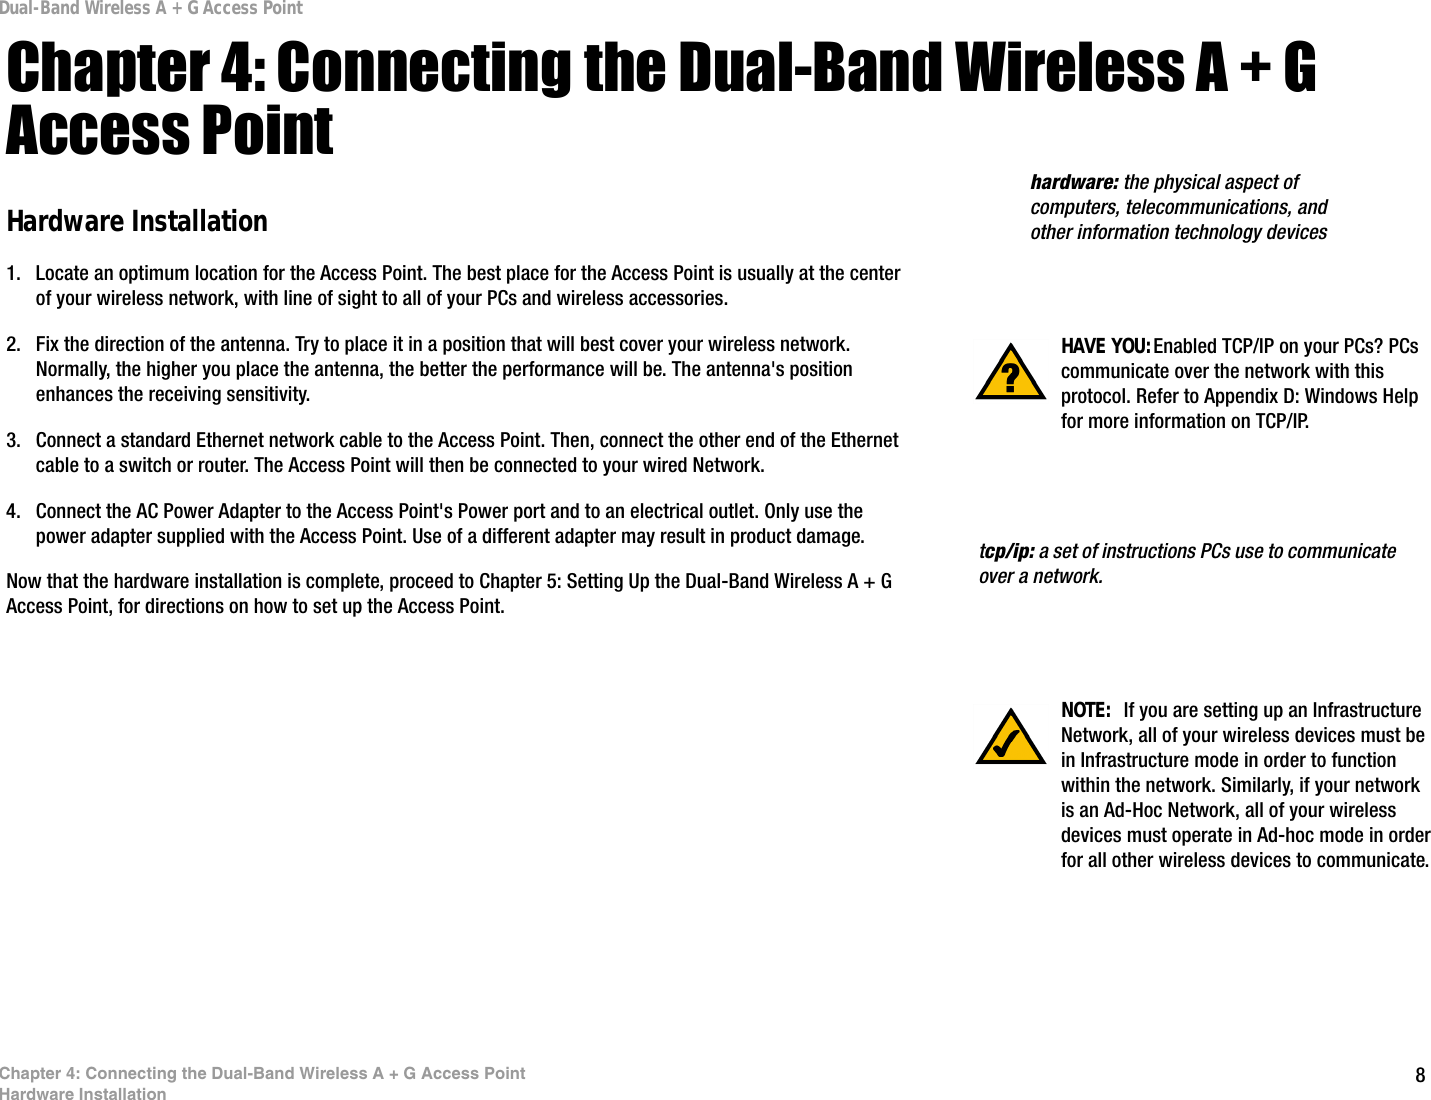 8Chapter 4: Connecting the Dual-Band Wireless A + G Access PointHardware InstallationDual-Band Wireless A + G Access PointChapter 4: Connecting the Dual-Band Wireless A + G Access PointHardware Installation1. Locate an optimum location for the Access Point. The best place for the Access Point is usually at the center of your wireless network, with line of sight to all of your PCs and wireless accessories.2. Fix the direction of the antenna. Try to place it in a position that will best cover your wireless network. Normally, the higher you place the antenna, the better the performance will be. The antenna&apos;s position enhances the receiving sensitivity.3. Connect a standard Ethernet network cable to the Access Point. Then, connect the other end of the Ethernet cable to a switch or router. The Access Point will then be connected to your wired Network.4. Connect the AC Power Adapter to the Access Point&apos;s Power port and to an electrical outlet. Only use the power adapter supplied with the Access Point. Use of a different adapter may result in product damage.Now that the hardware installation is complete, proceed to Chapter 5: Setting Up the Dual-Band Wireless A + G Access Point, for directions on how to set up the Access Point. tcp/ip: a set of instructions PCs use to communicate over a network.HAVE YOU:Enabled TCP/IP on your PCs? PCs communicate over the network with this protocol. Refer to Appendix D: Windows Help for more information on TCP/IP.hardware: the physical aspect of computers, telecommunications, and other information technology devicesNOTE:  If you are setting up an Infrastructure Network, all of your wireless devices must be in Infrastructure mode in order to function within the network. Similarly, if your network is an Ad-Hoc Network, all of your wireless devices must operate in Ad-hoc mode in order for all other wireless devices to communicate.